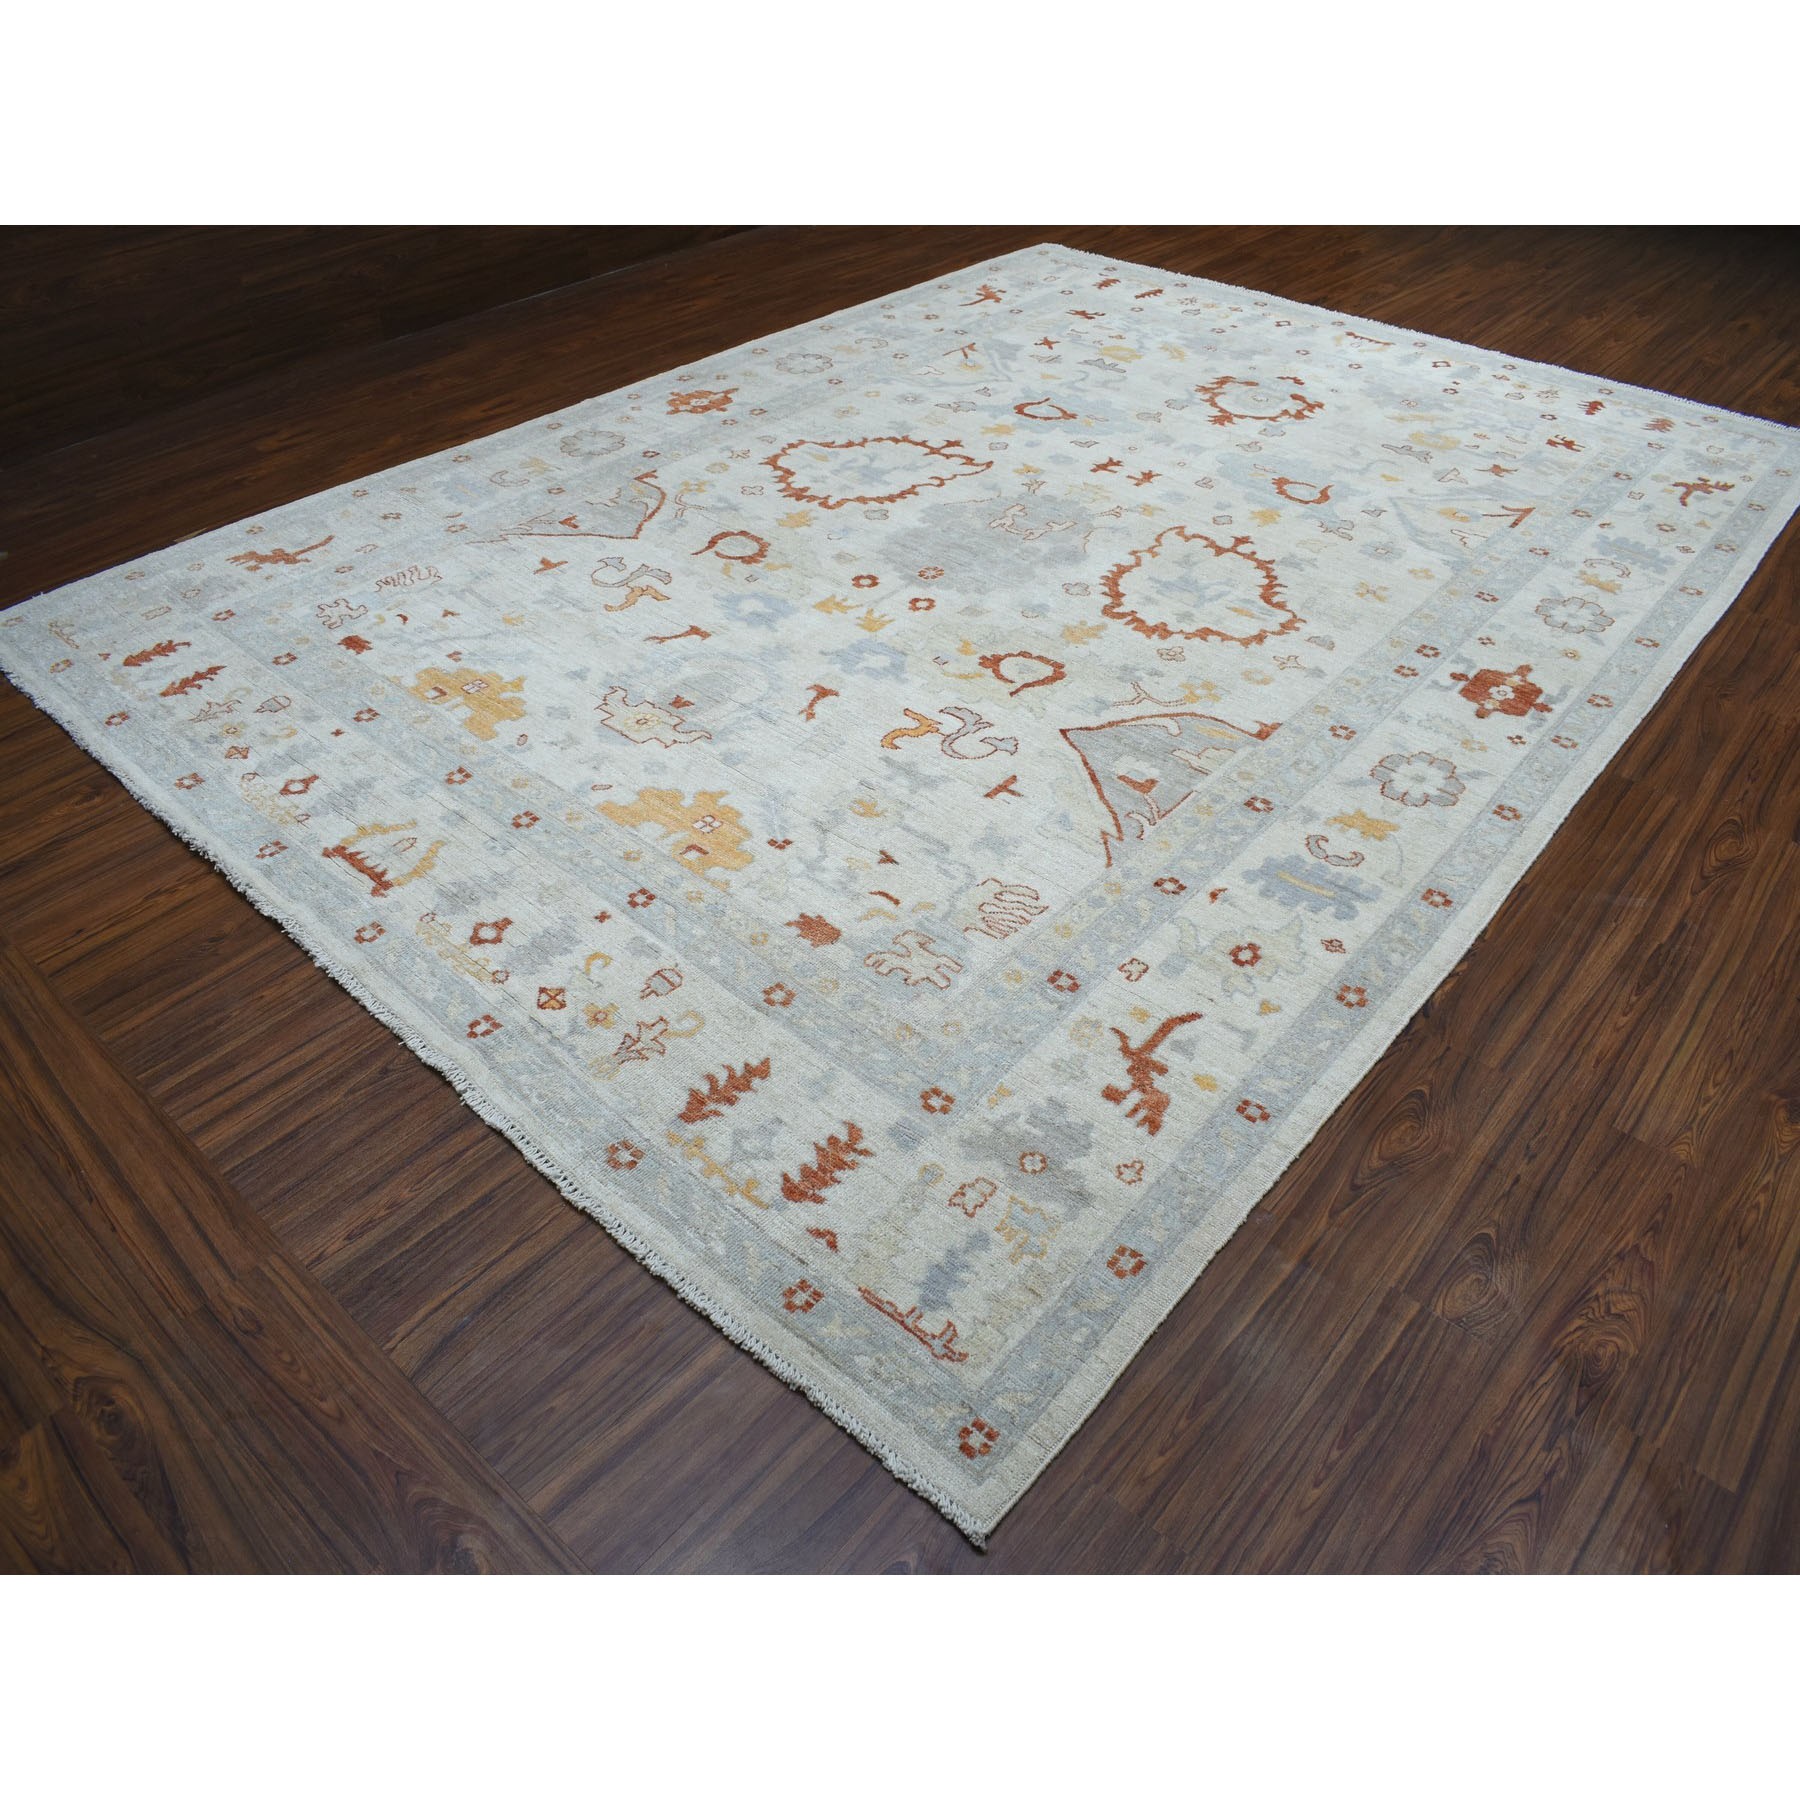 10-1 x13-8  Ivory Angora Oushak Pure Wool Hand Knotted Oriental Rug 